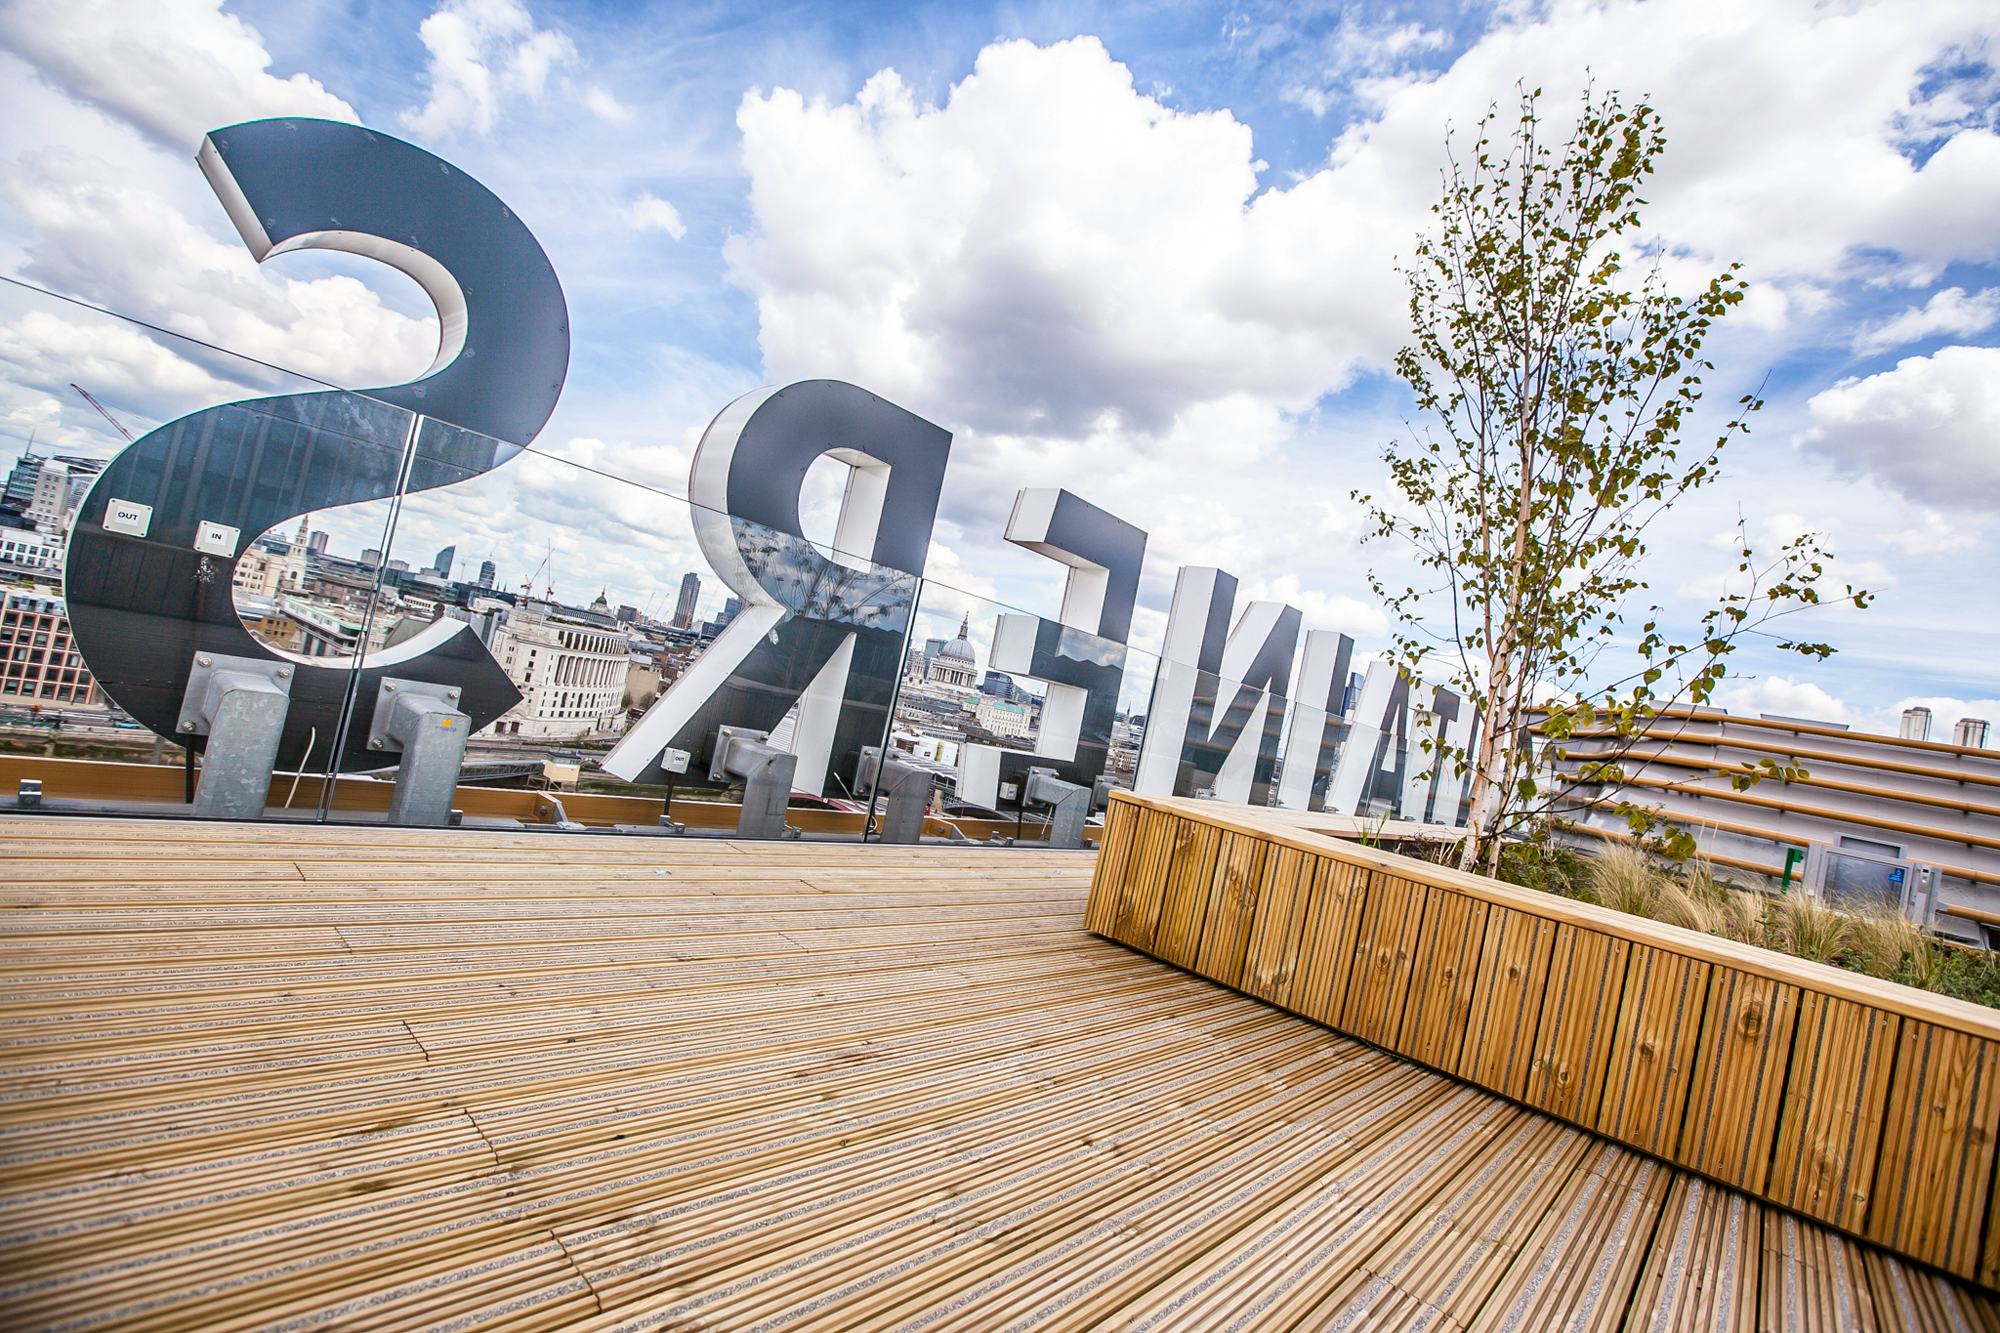 Sea Containers Events summer parties roof terrace venues with a view